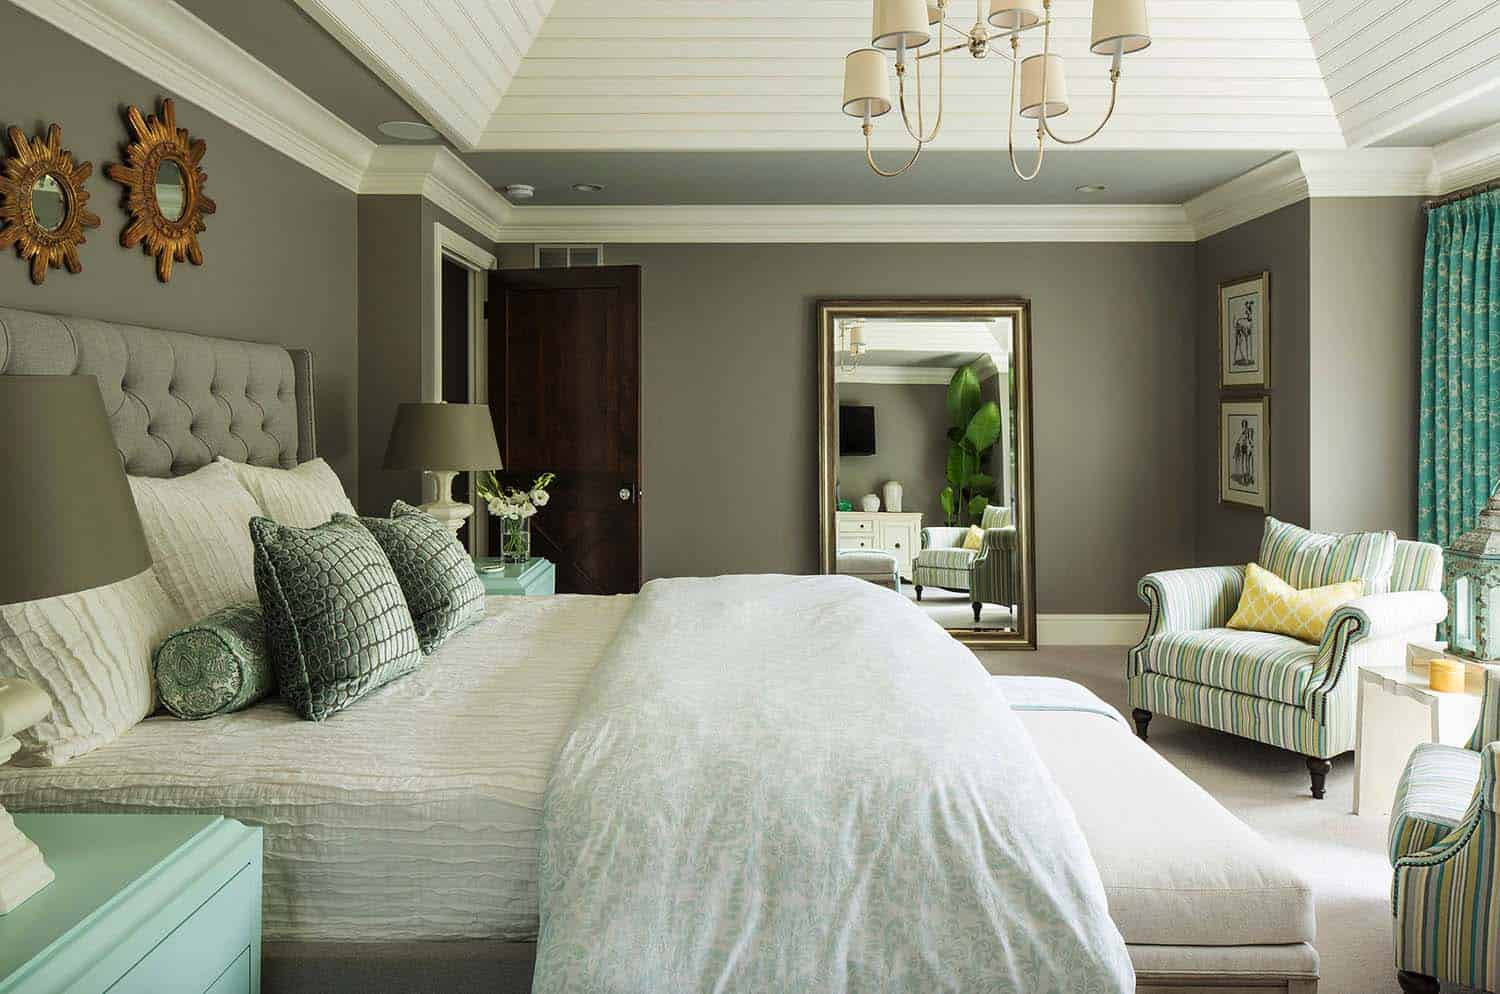 Popular Bedroom Colors
 25 Absolutely stunning master bedroom color scheme ideas